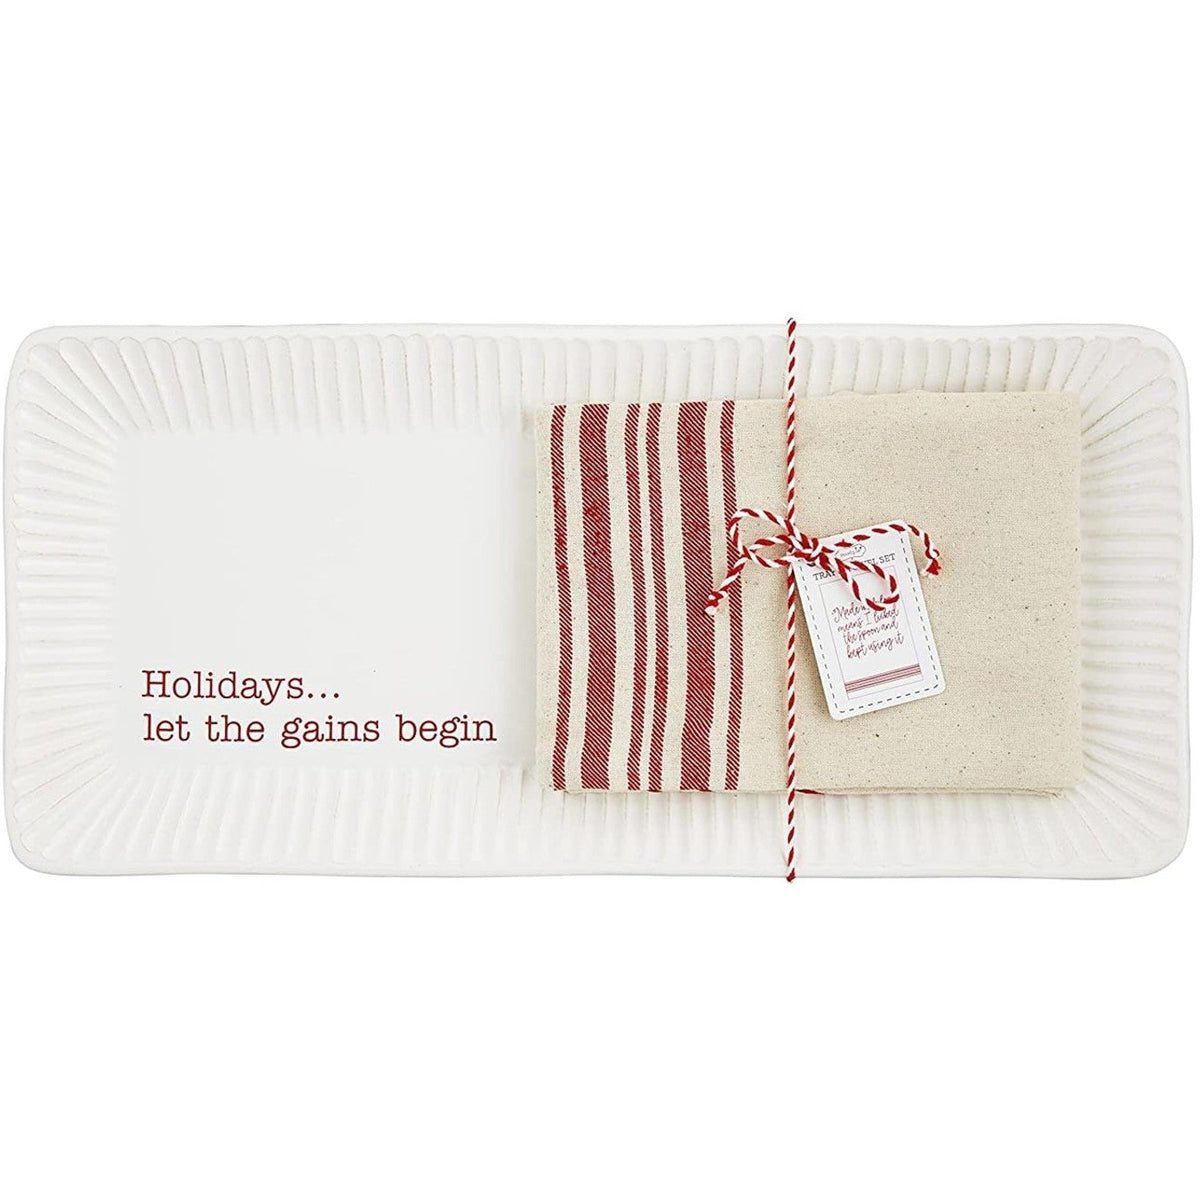 Gains Begin Tray And Towel Set - Zinnias Gift Boutique